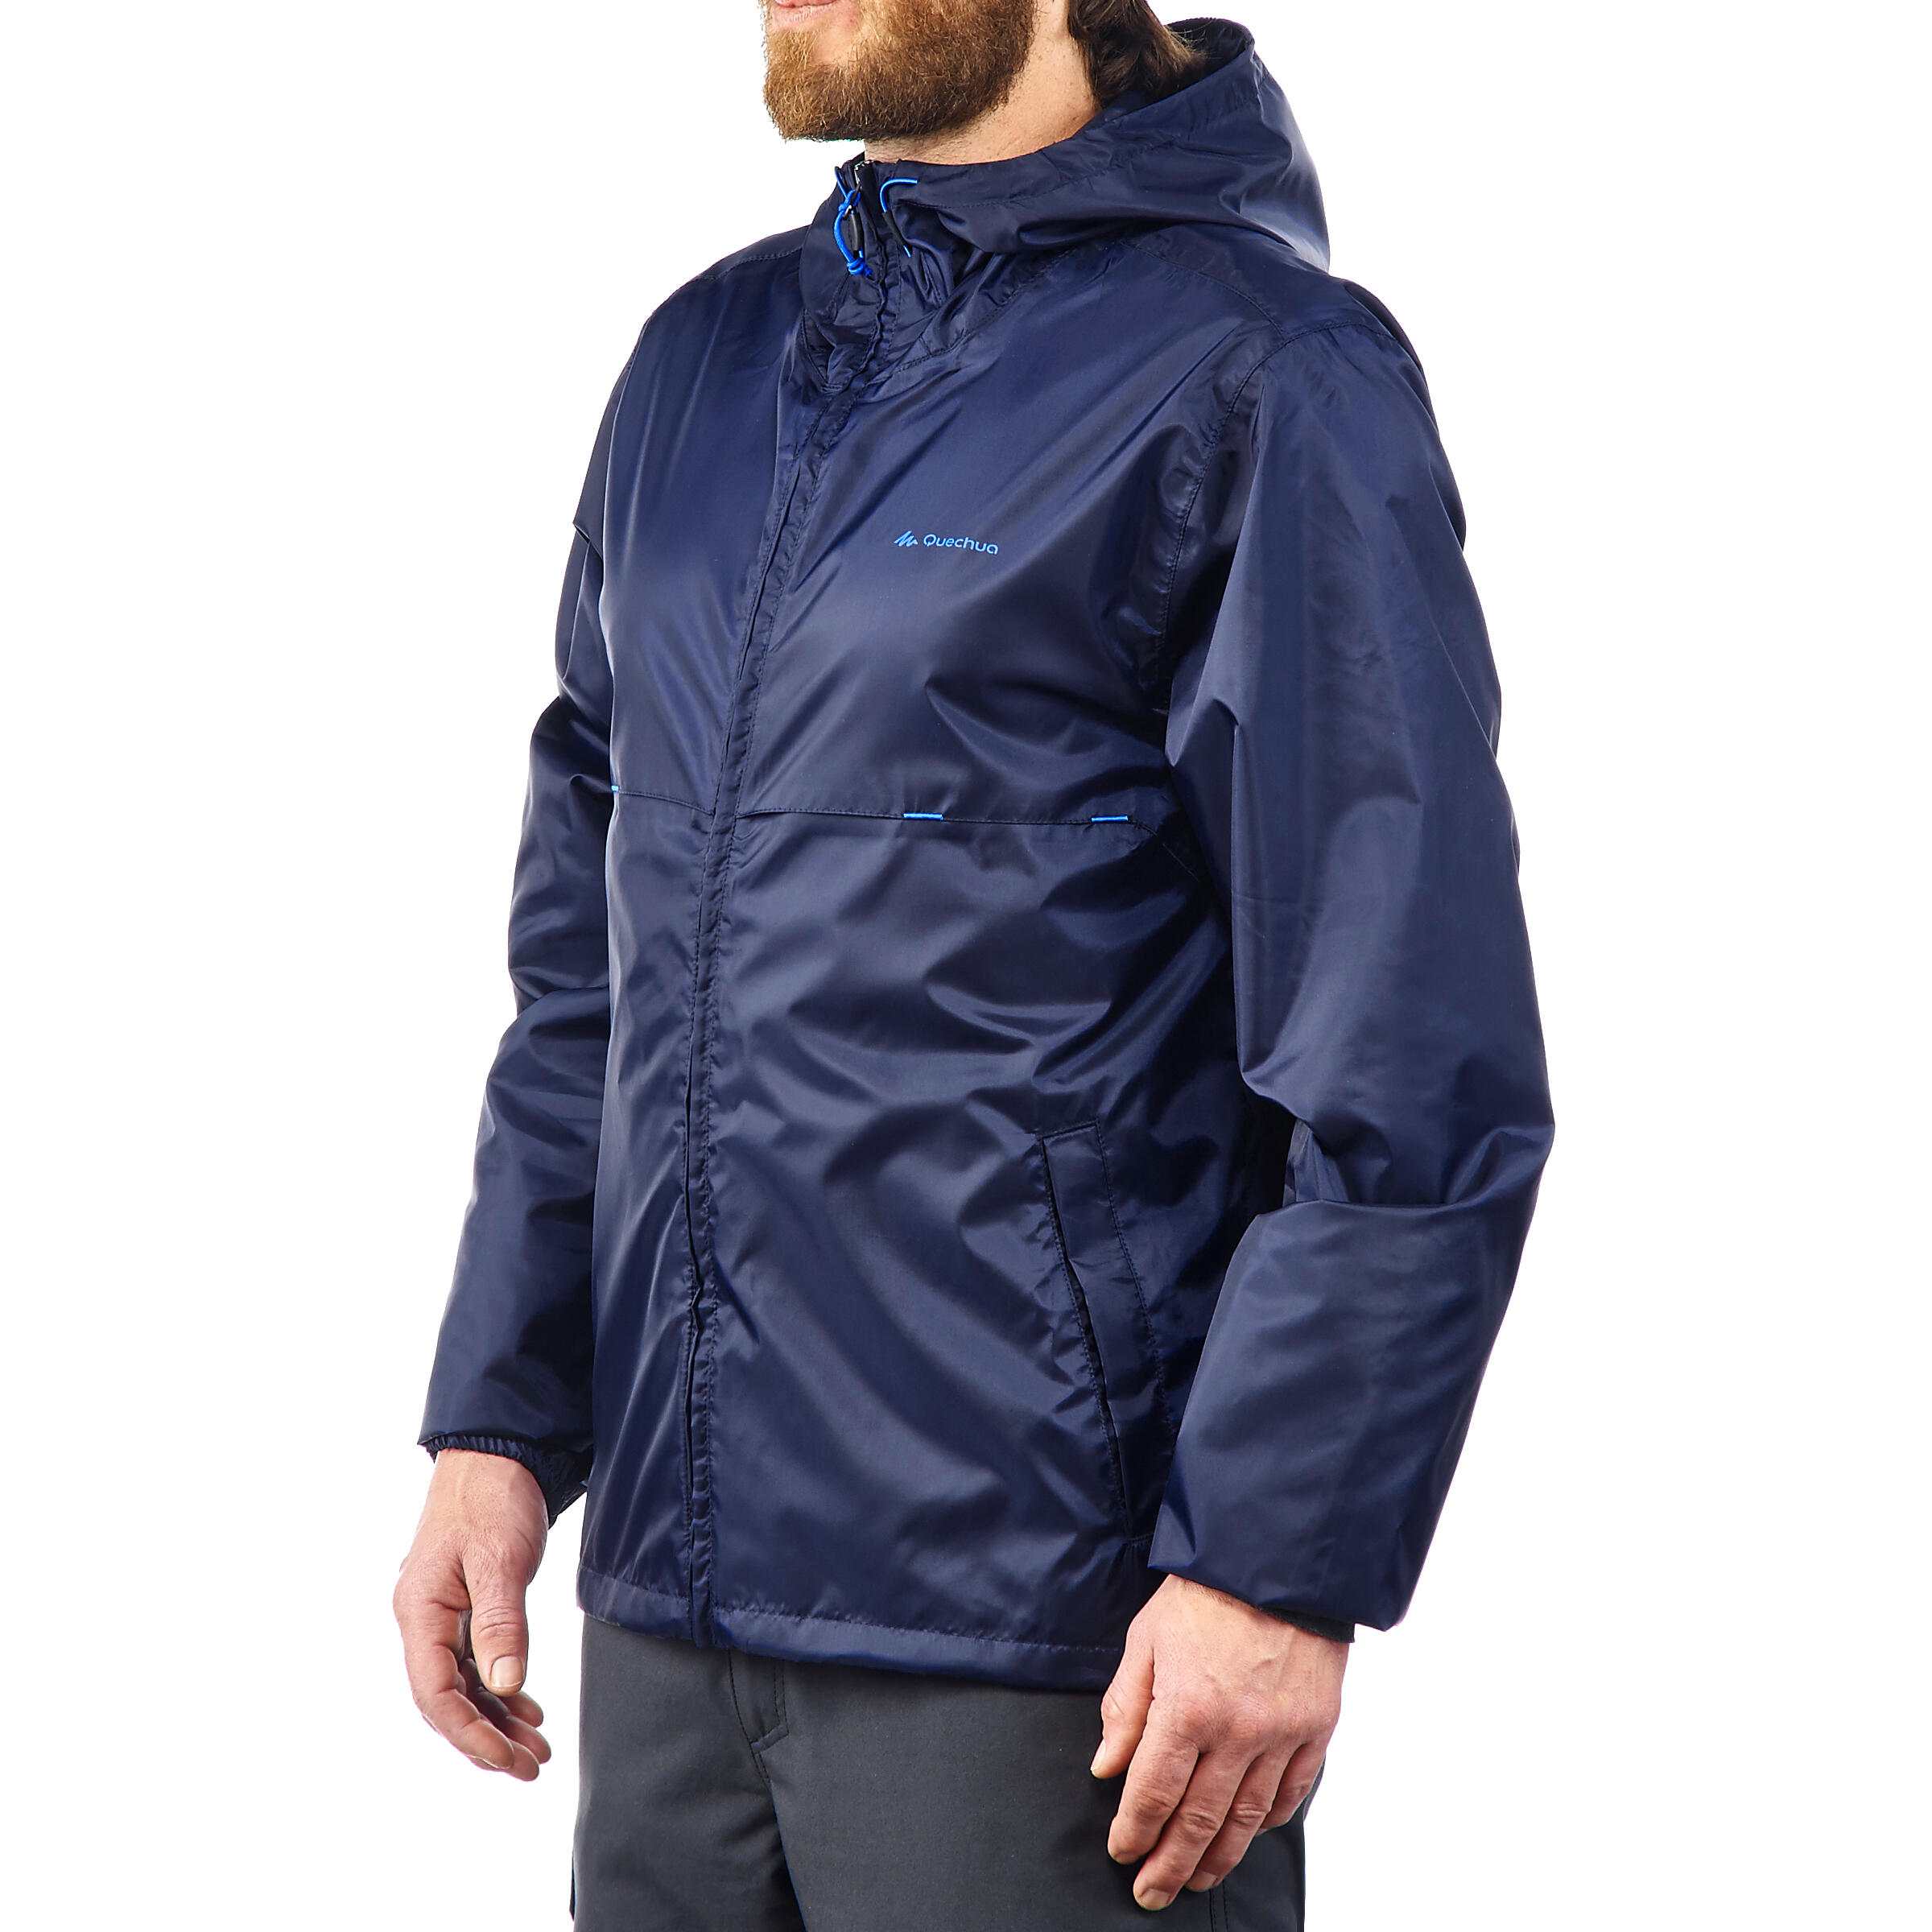 40% OFF on QUECHUA Arpenaz 300 Rain Men's Waterproof 3 in 1 Hiking Jacket  By Decathlon on Snapdeal | PaisaWapas.com